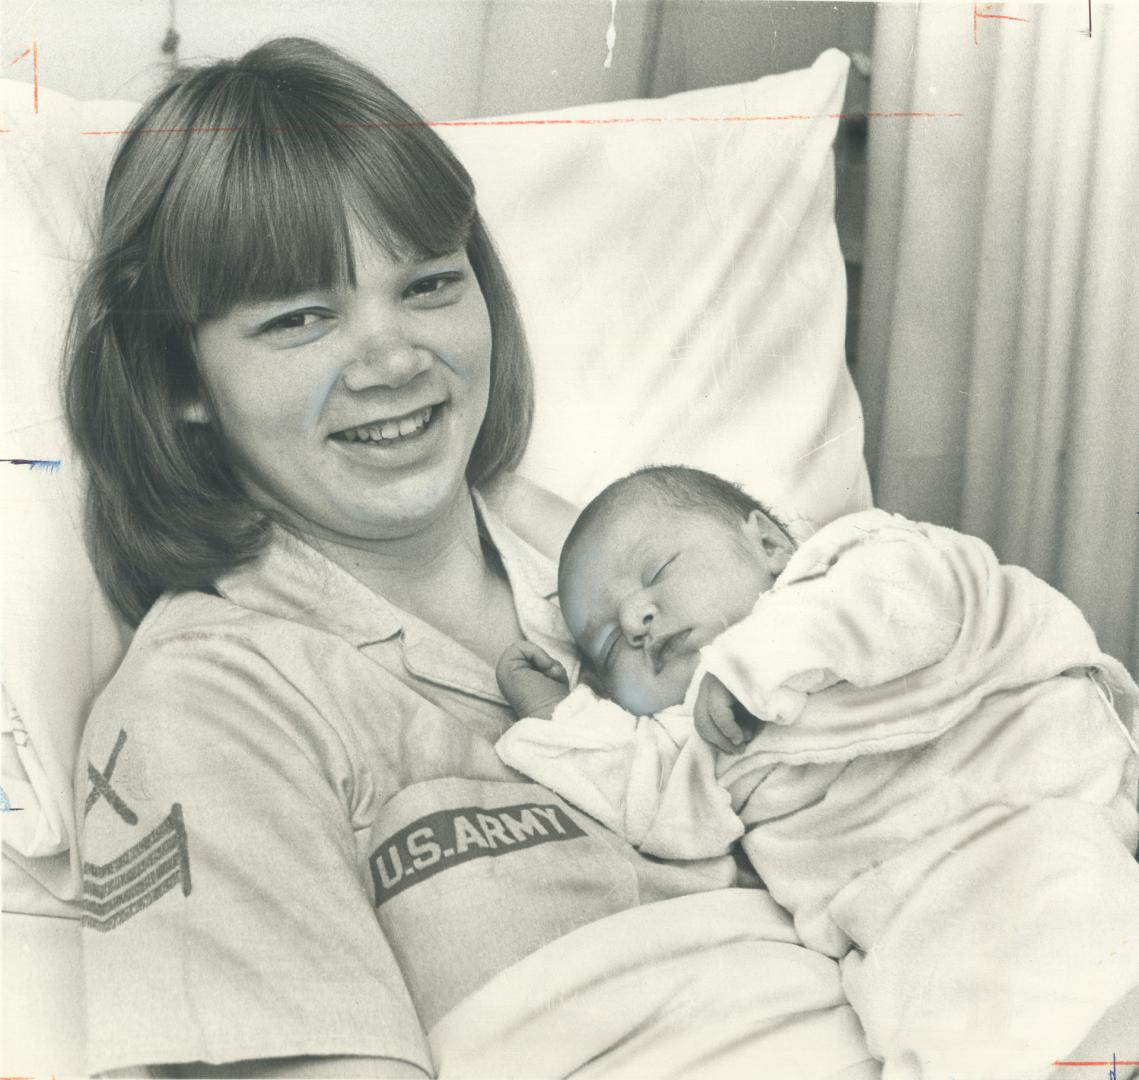 She didn't know until she awakened yesterday morning that her daughter was first baby born in Metro in 1978, said 22-year-old Kathleen Carter. Kelly A(...)